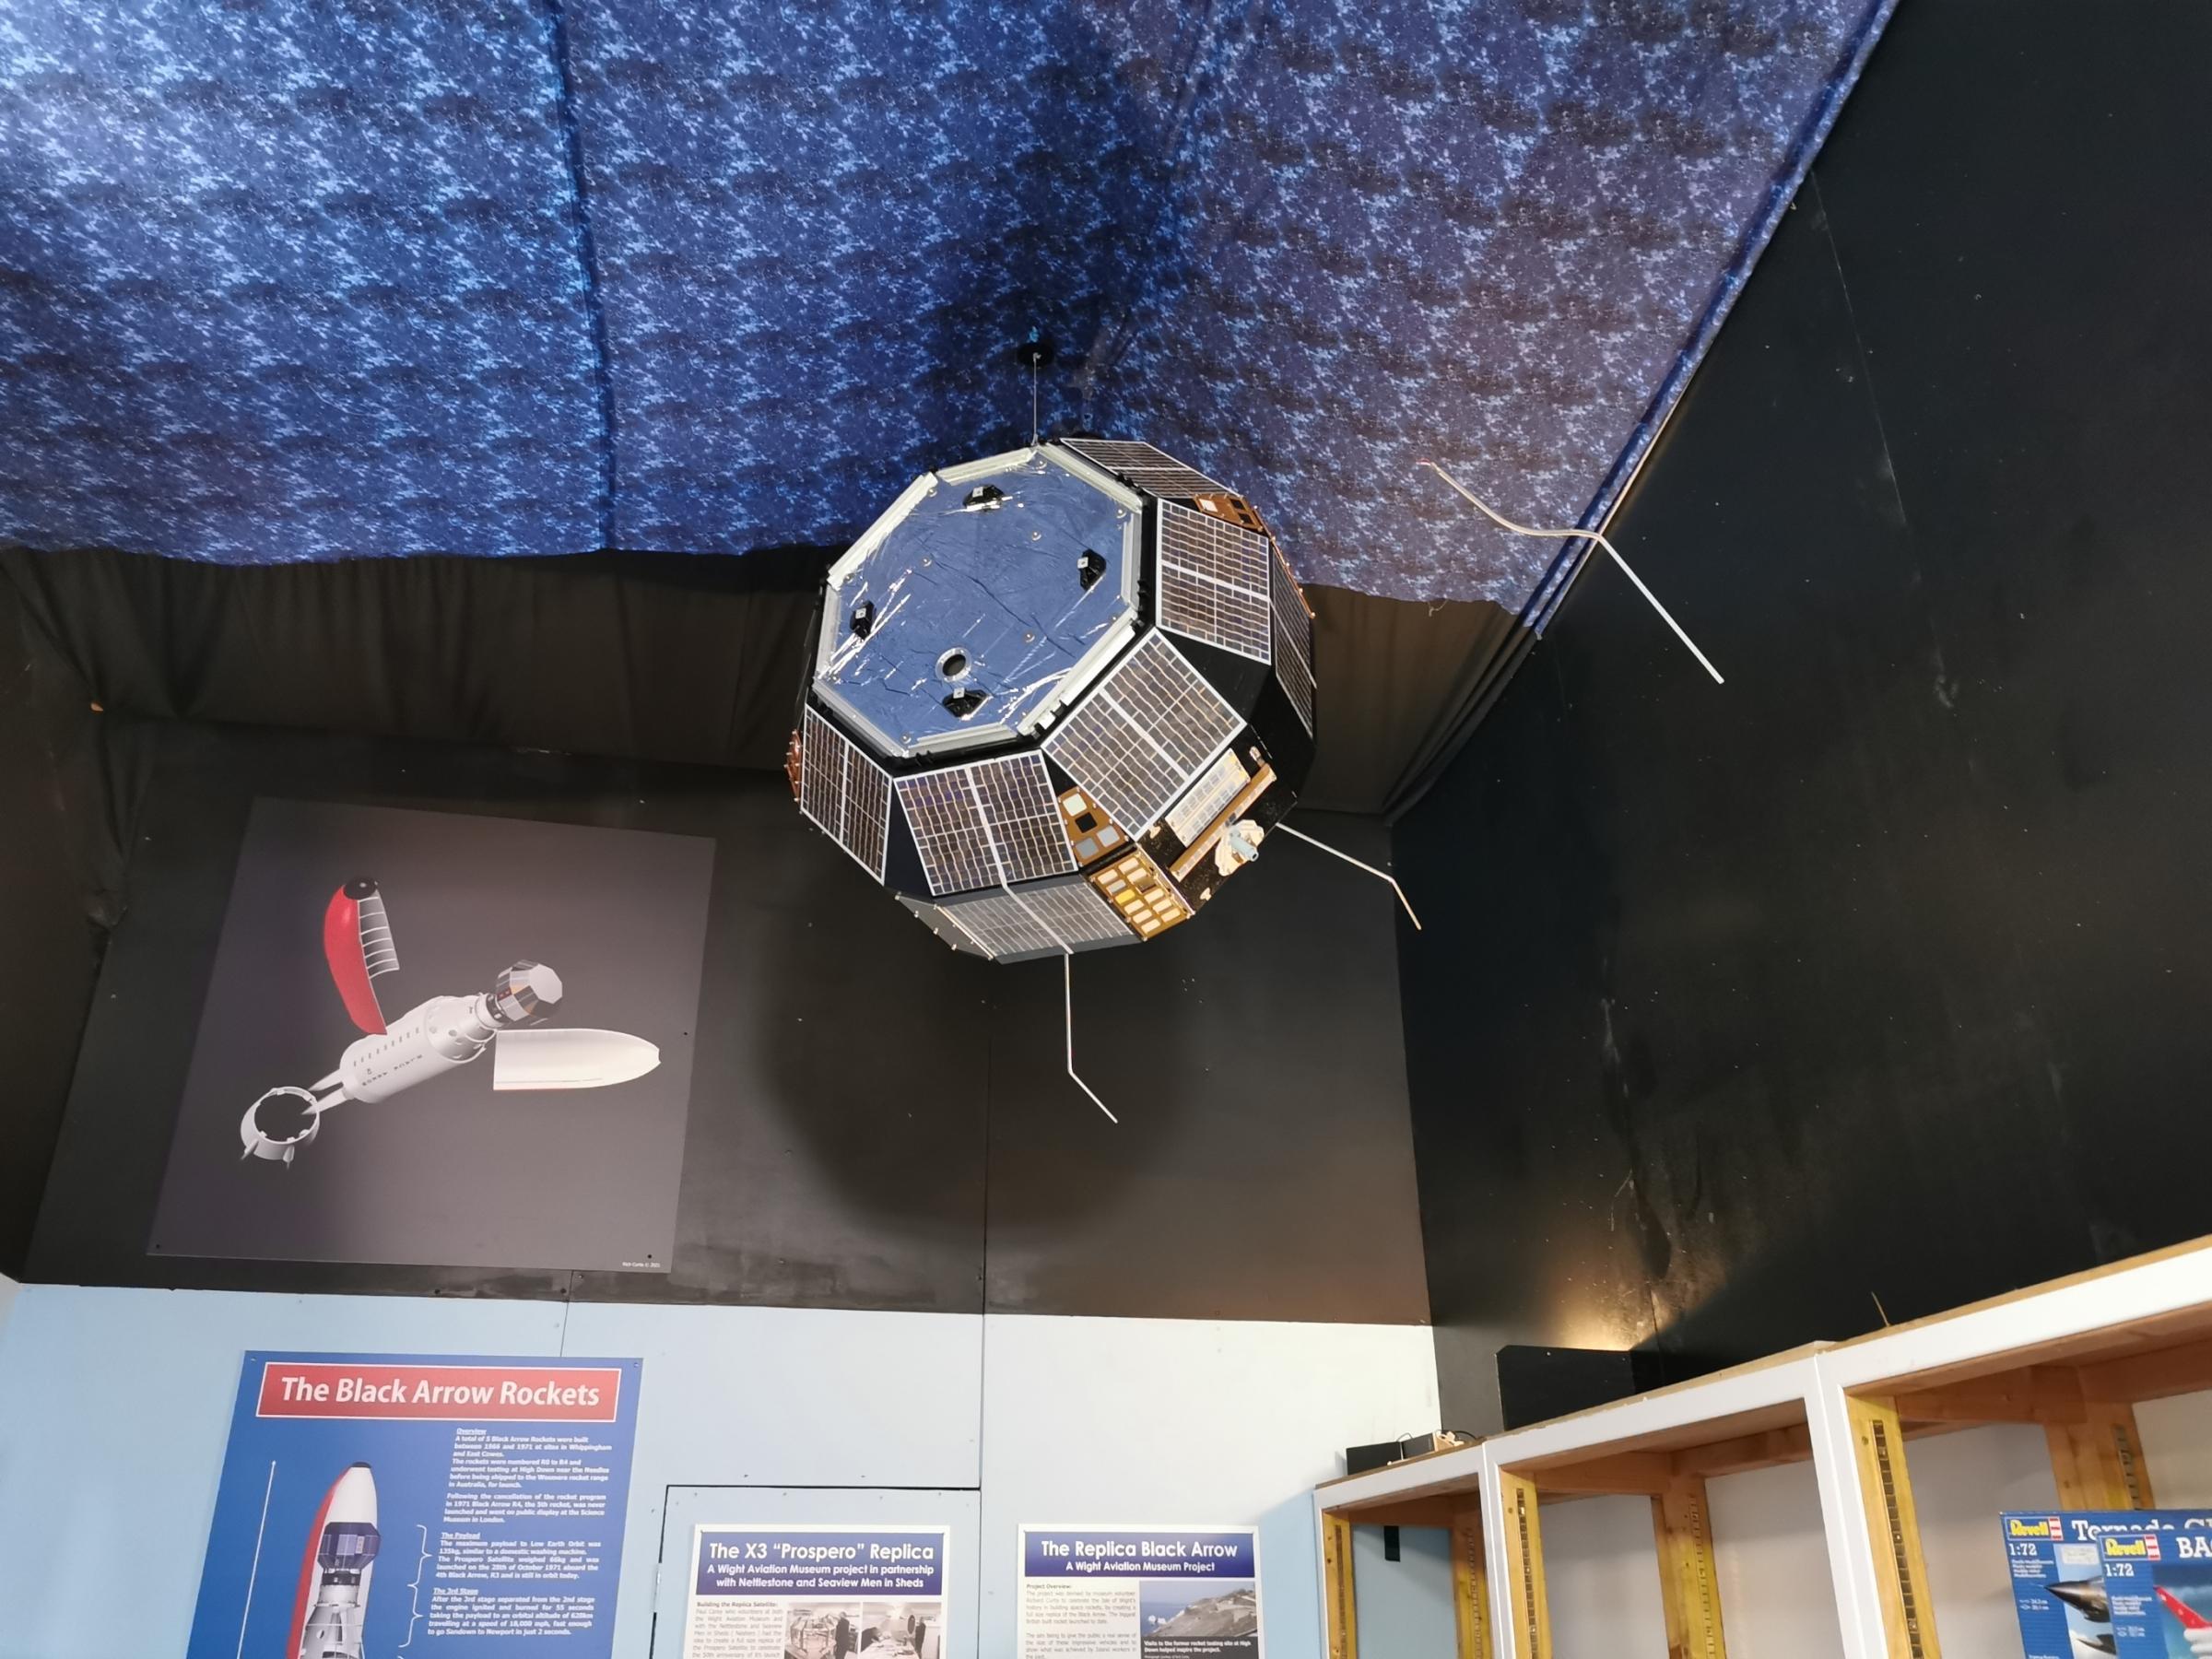 The completed X3 Prospero satellite replica, hanging at the Wight Aviation Museum.